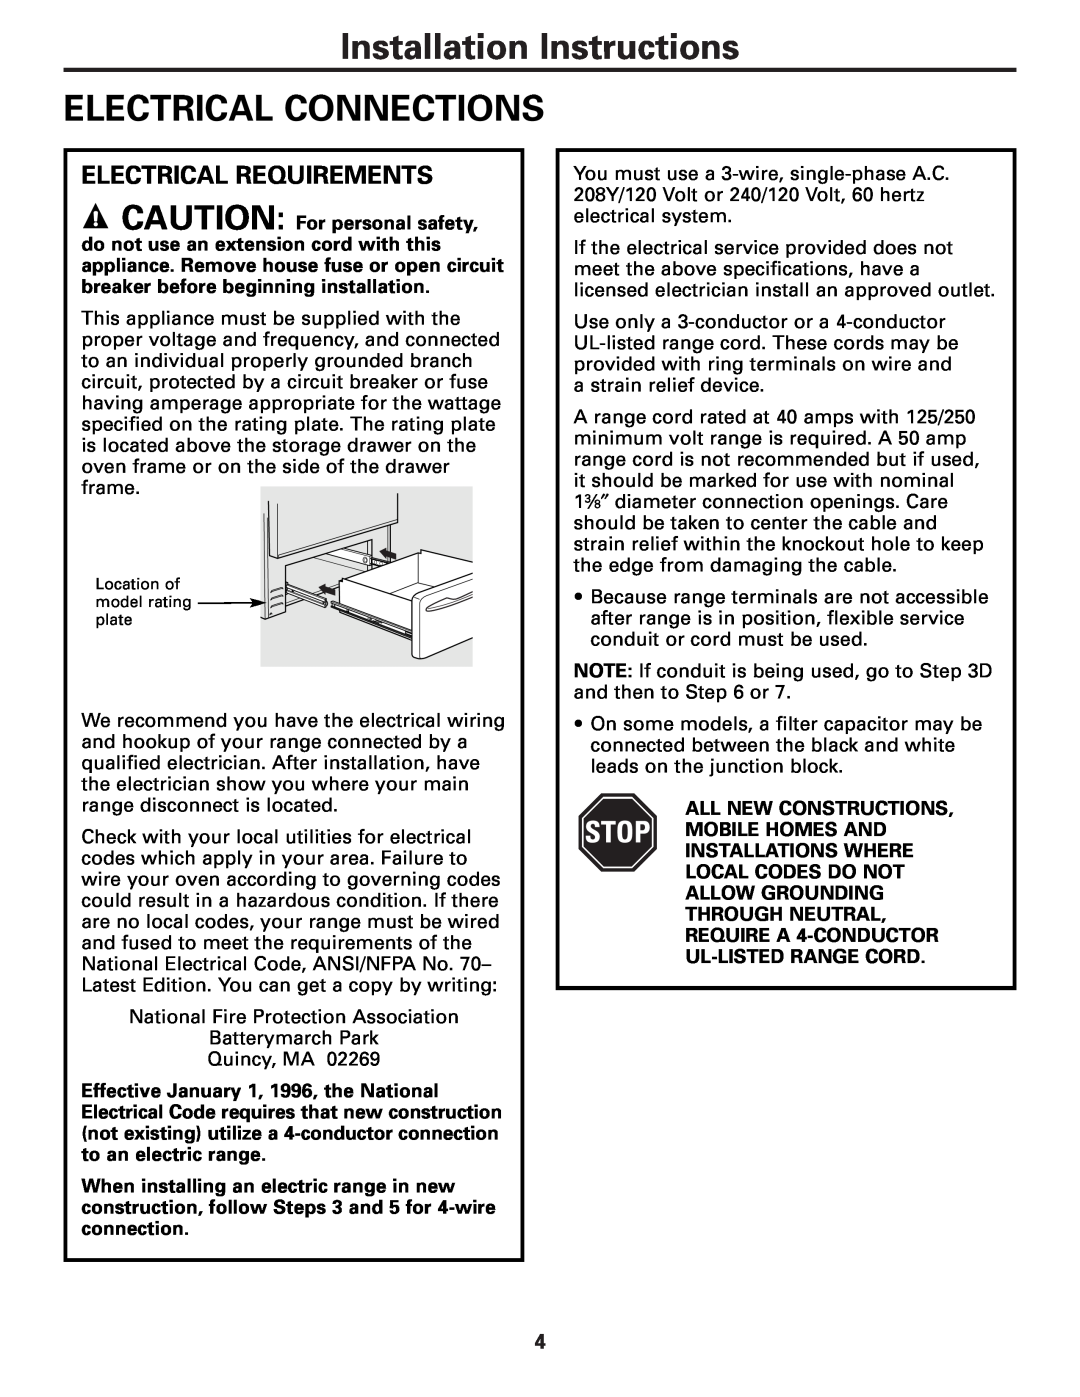 GE Free-Standing Electric Ranges warranty Installation Instructions ELECTRICAL CONNECTIONS, Electrical Requirements 